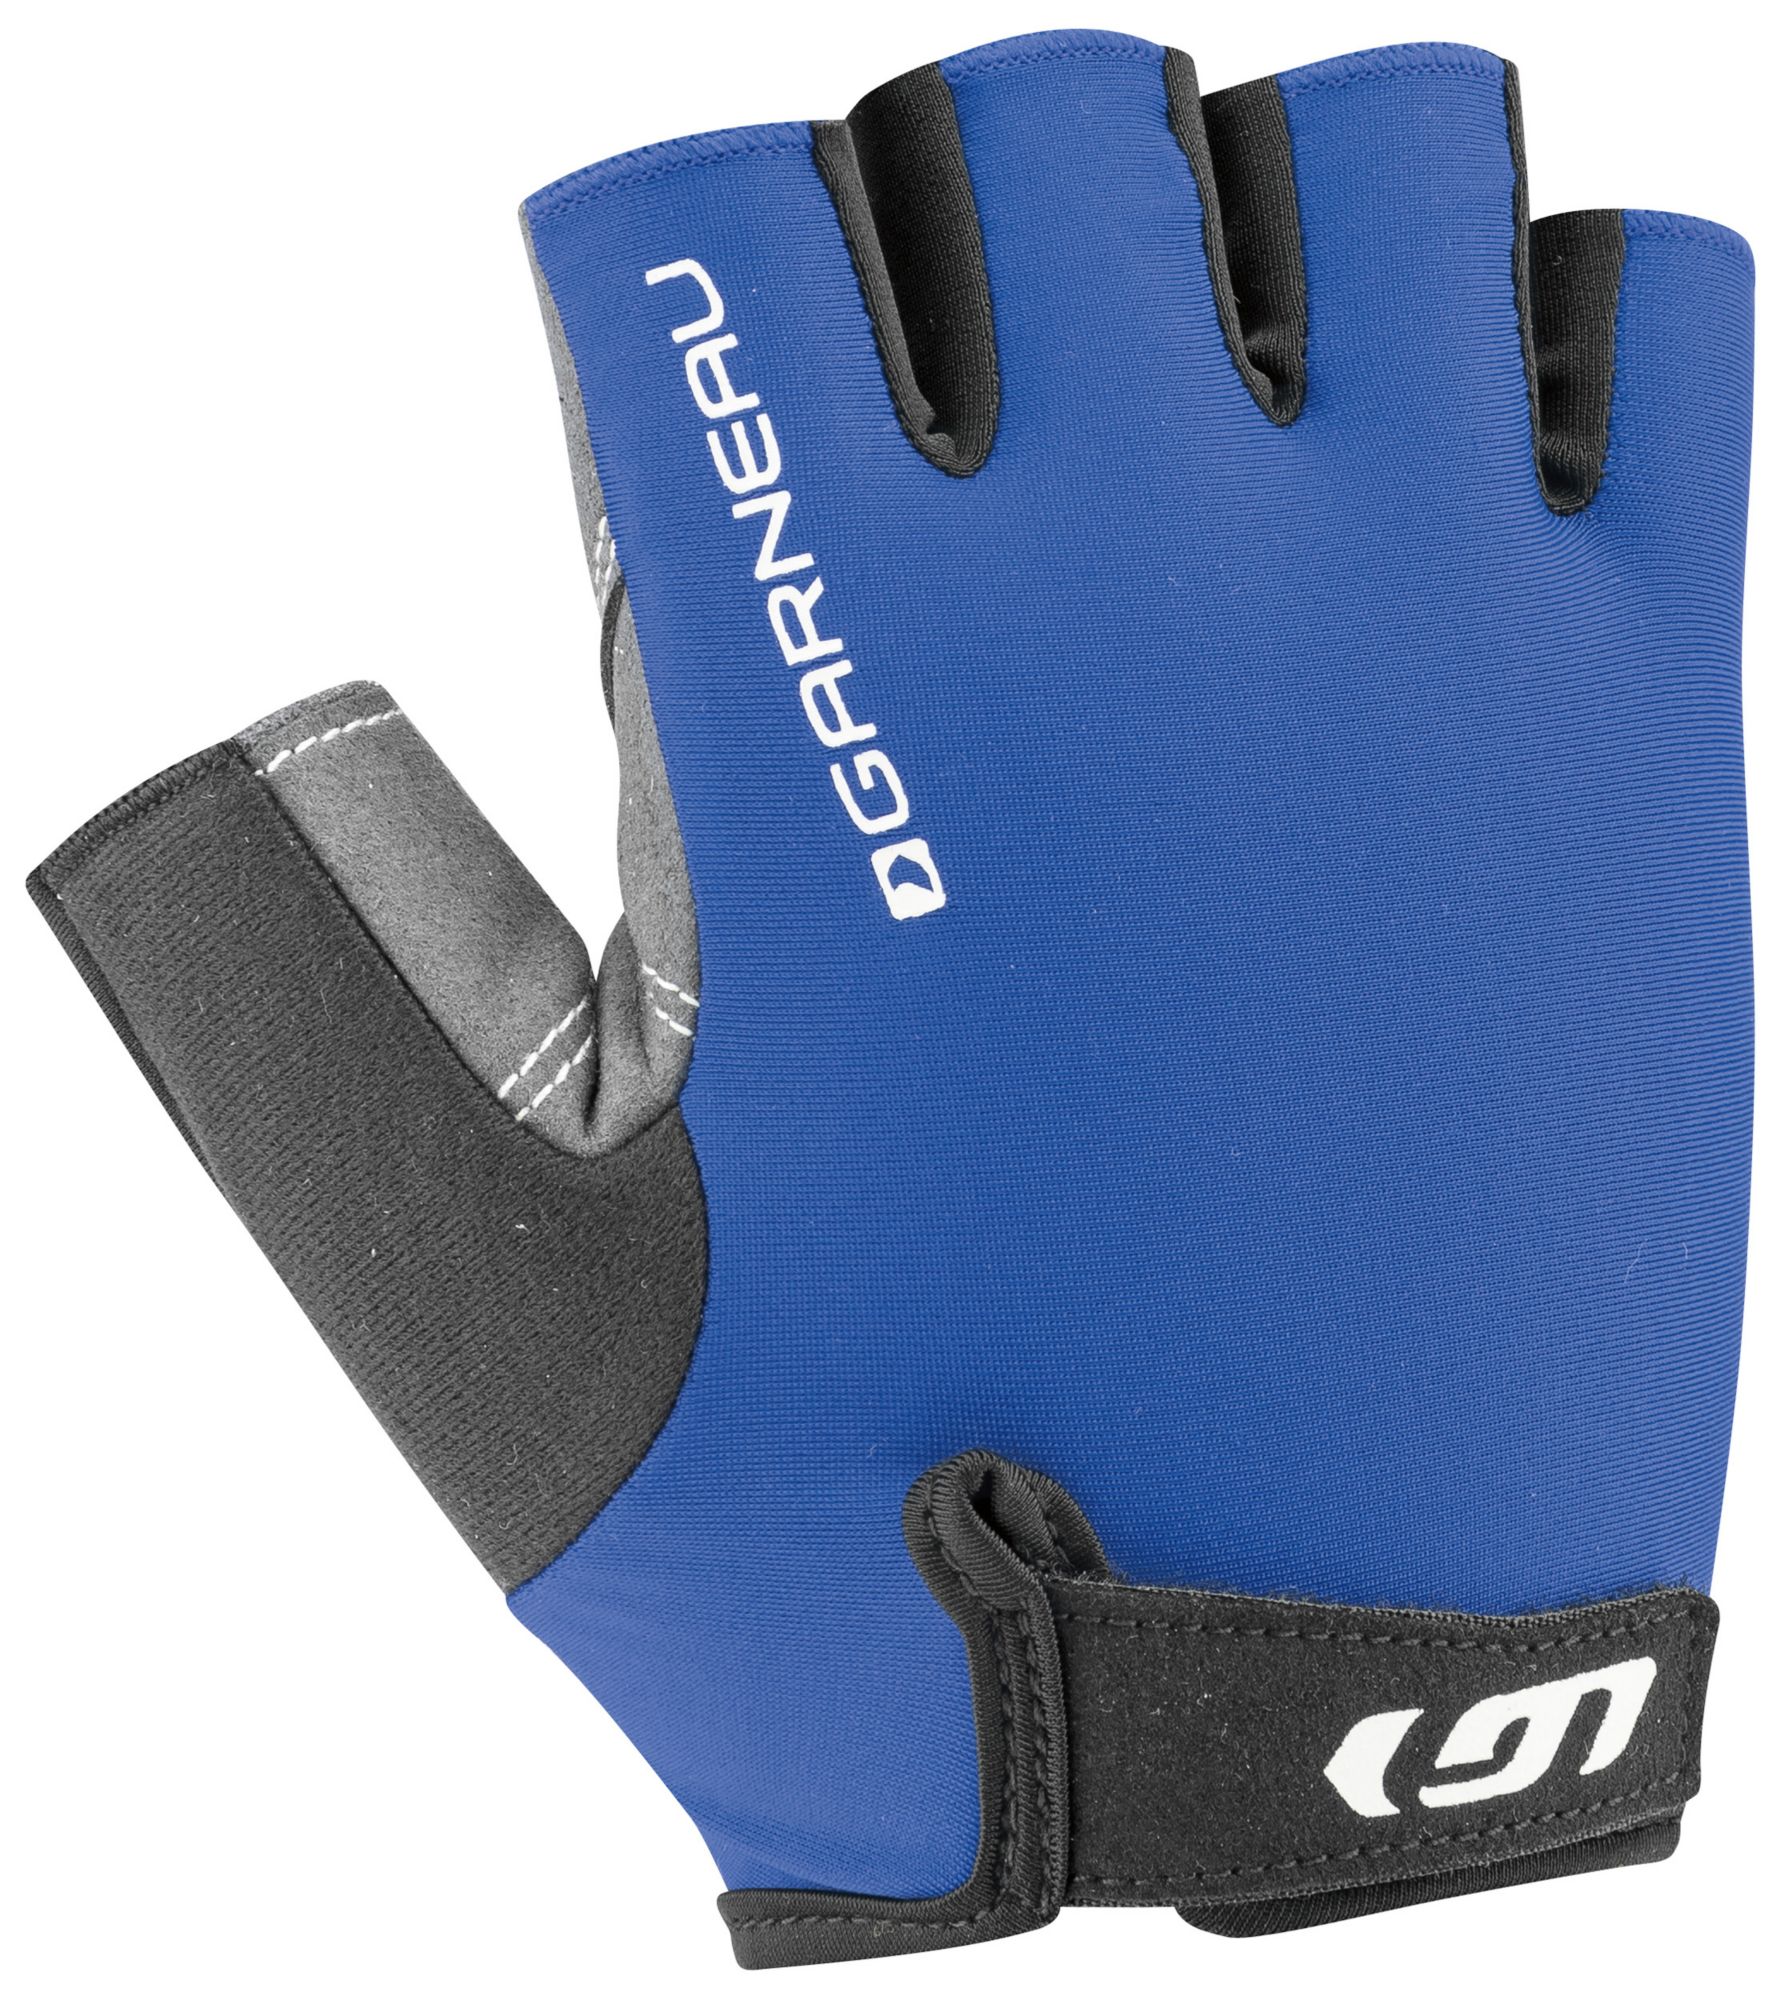 Bike Gloves & Cycling Gloves | Best Price Guarantee at DICK&#39;S